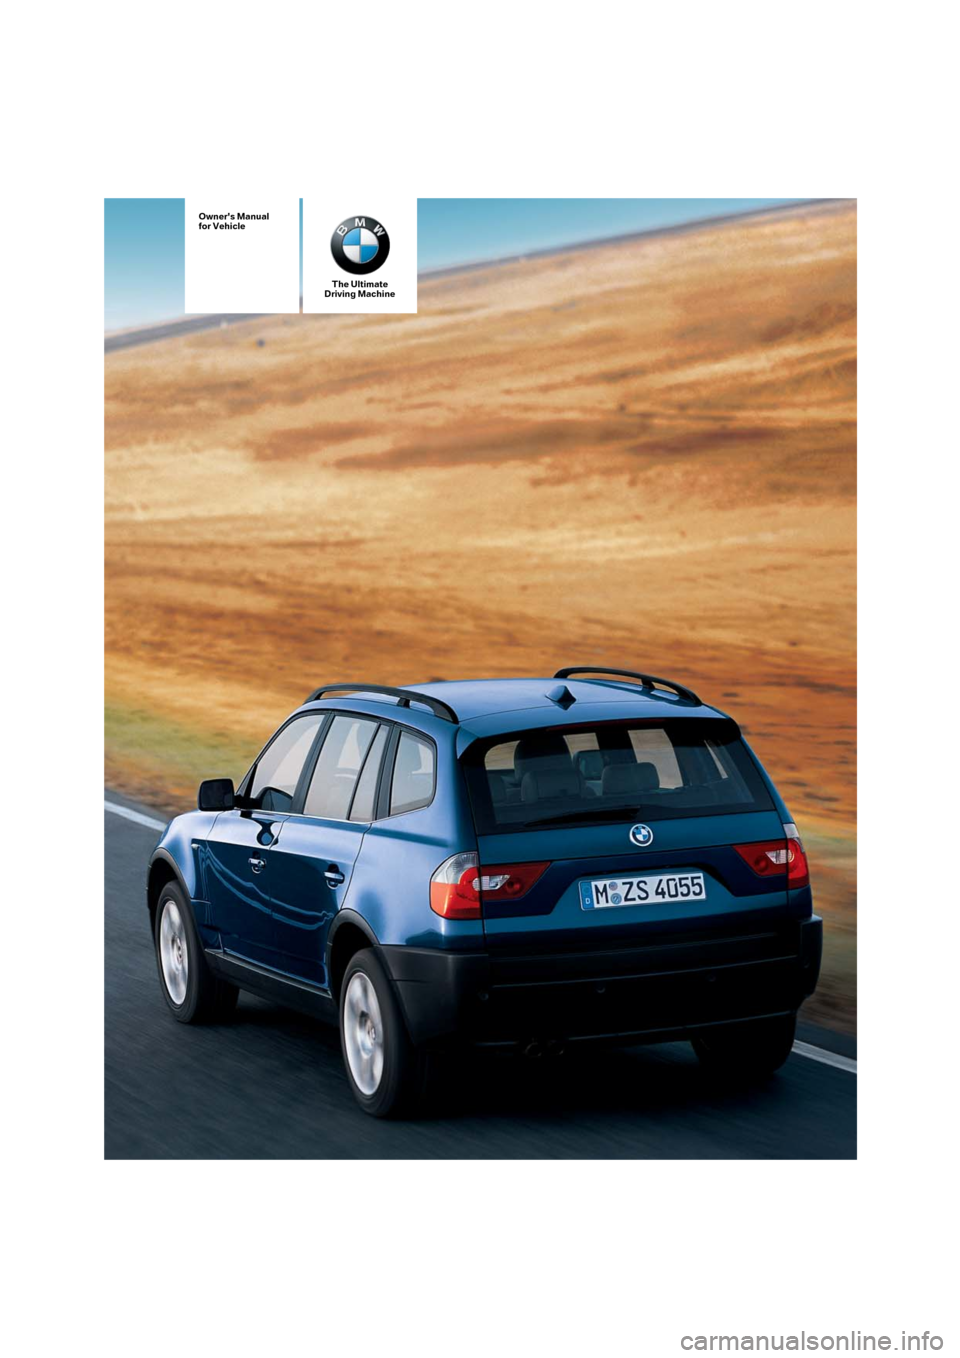 BMW X3 3.0I 2006 E83 Owners Manual The Ultimate
Driving Machine
Owners Manual
for Vehicle 